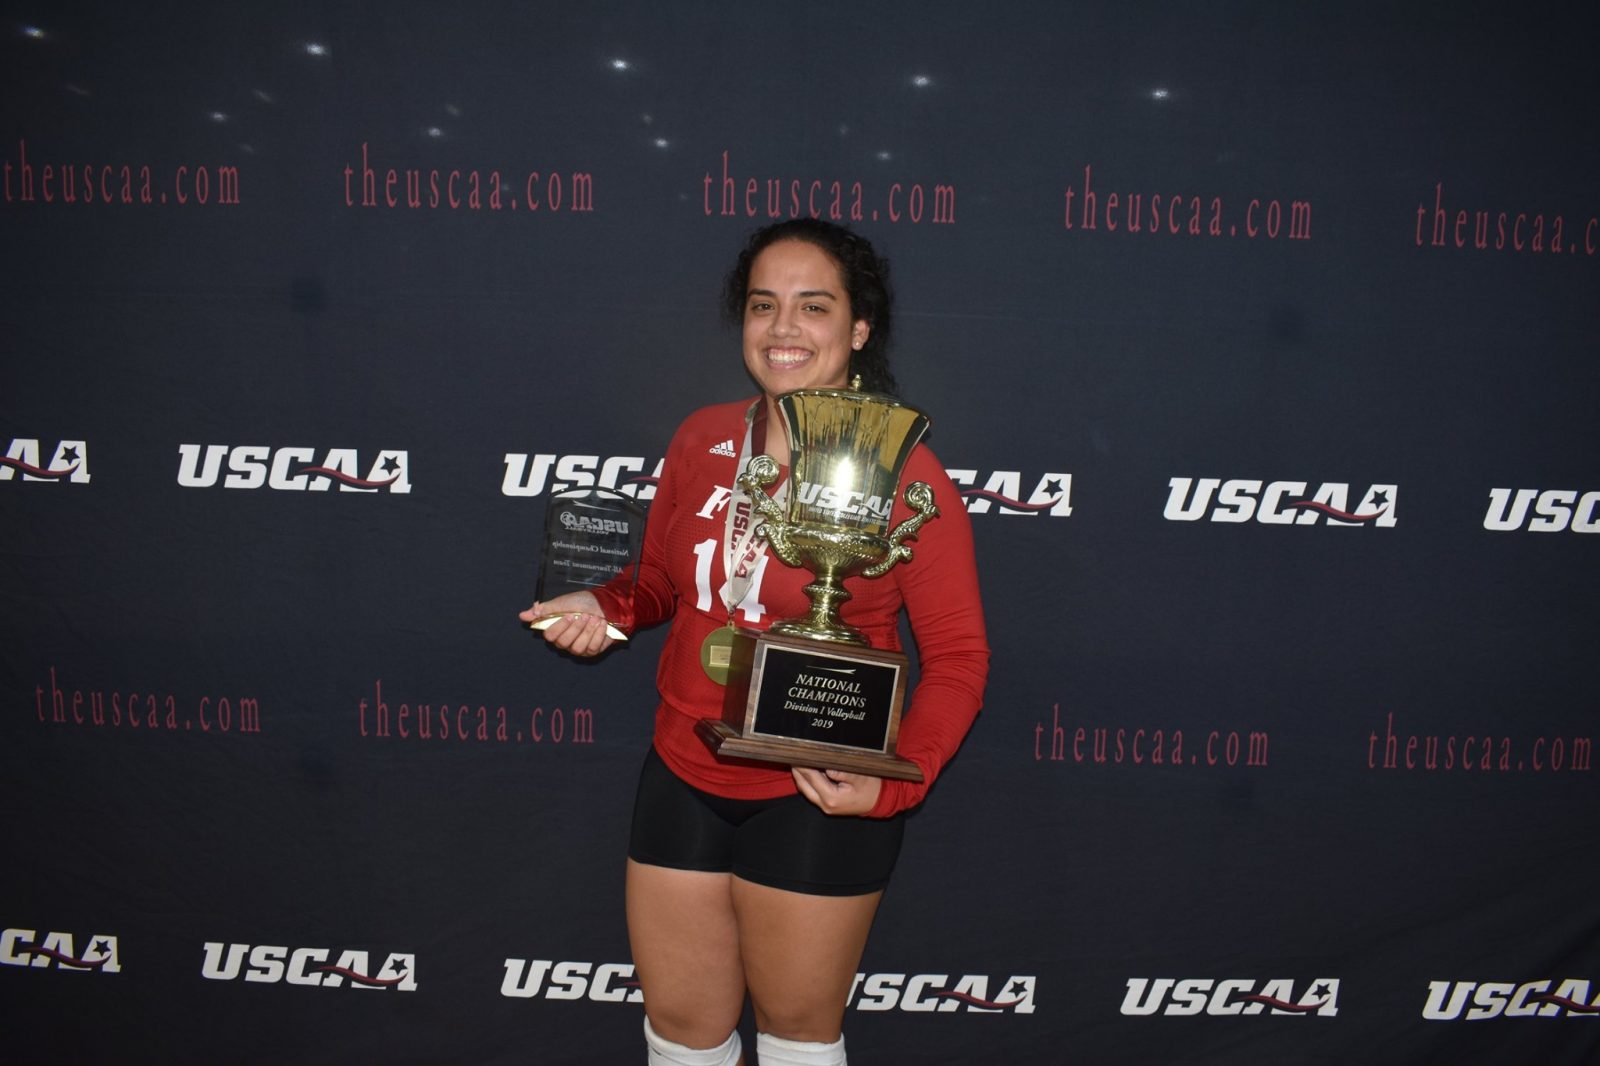 Gabriela Hernandez Volleyball player with the awards received